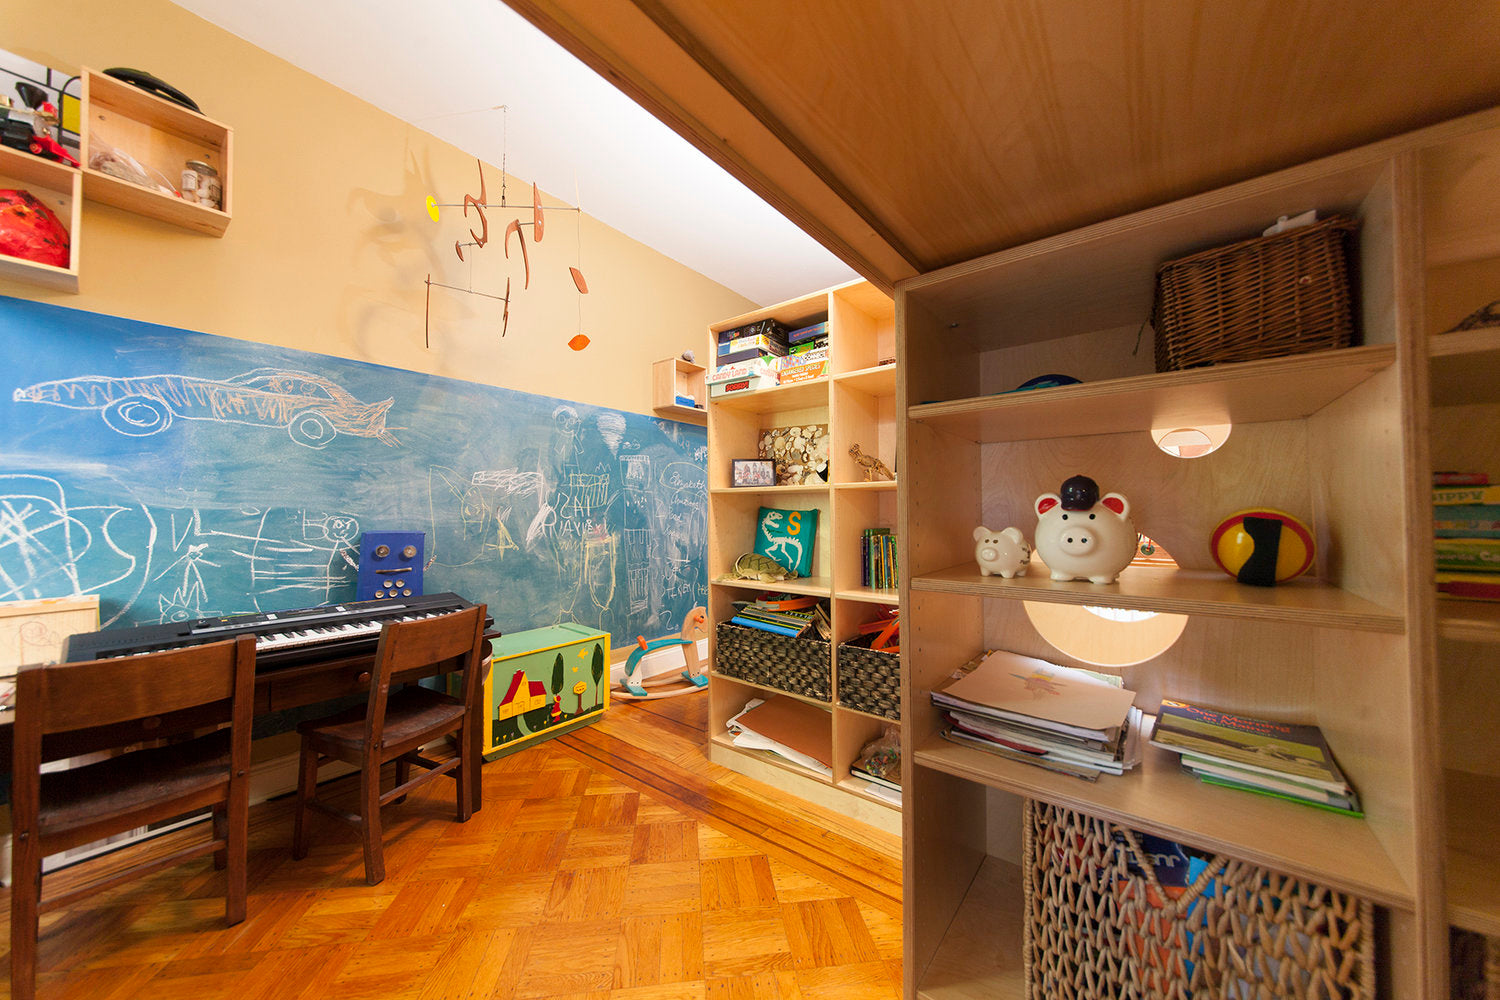 Child’s room with piano, chalkboard wall, shelving, toys, and books.